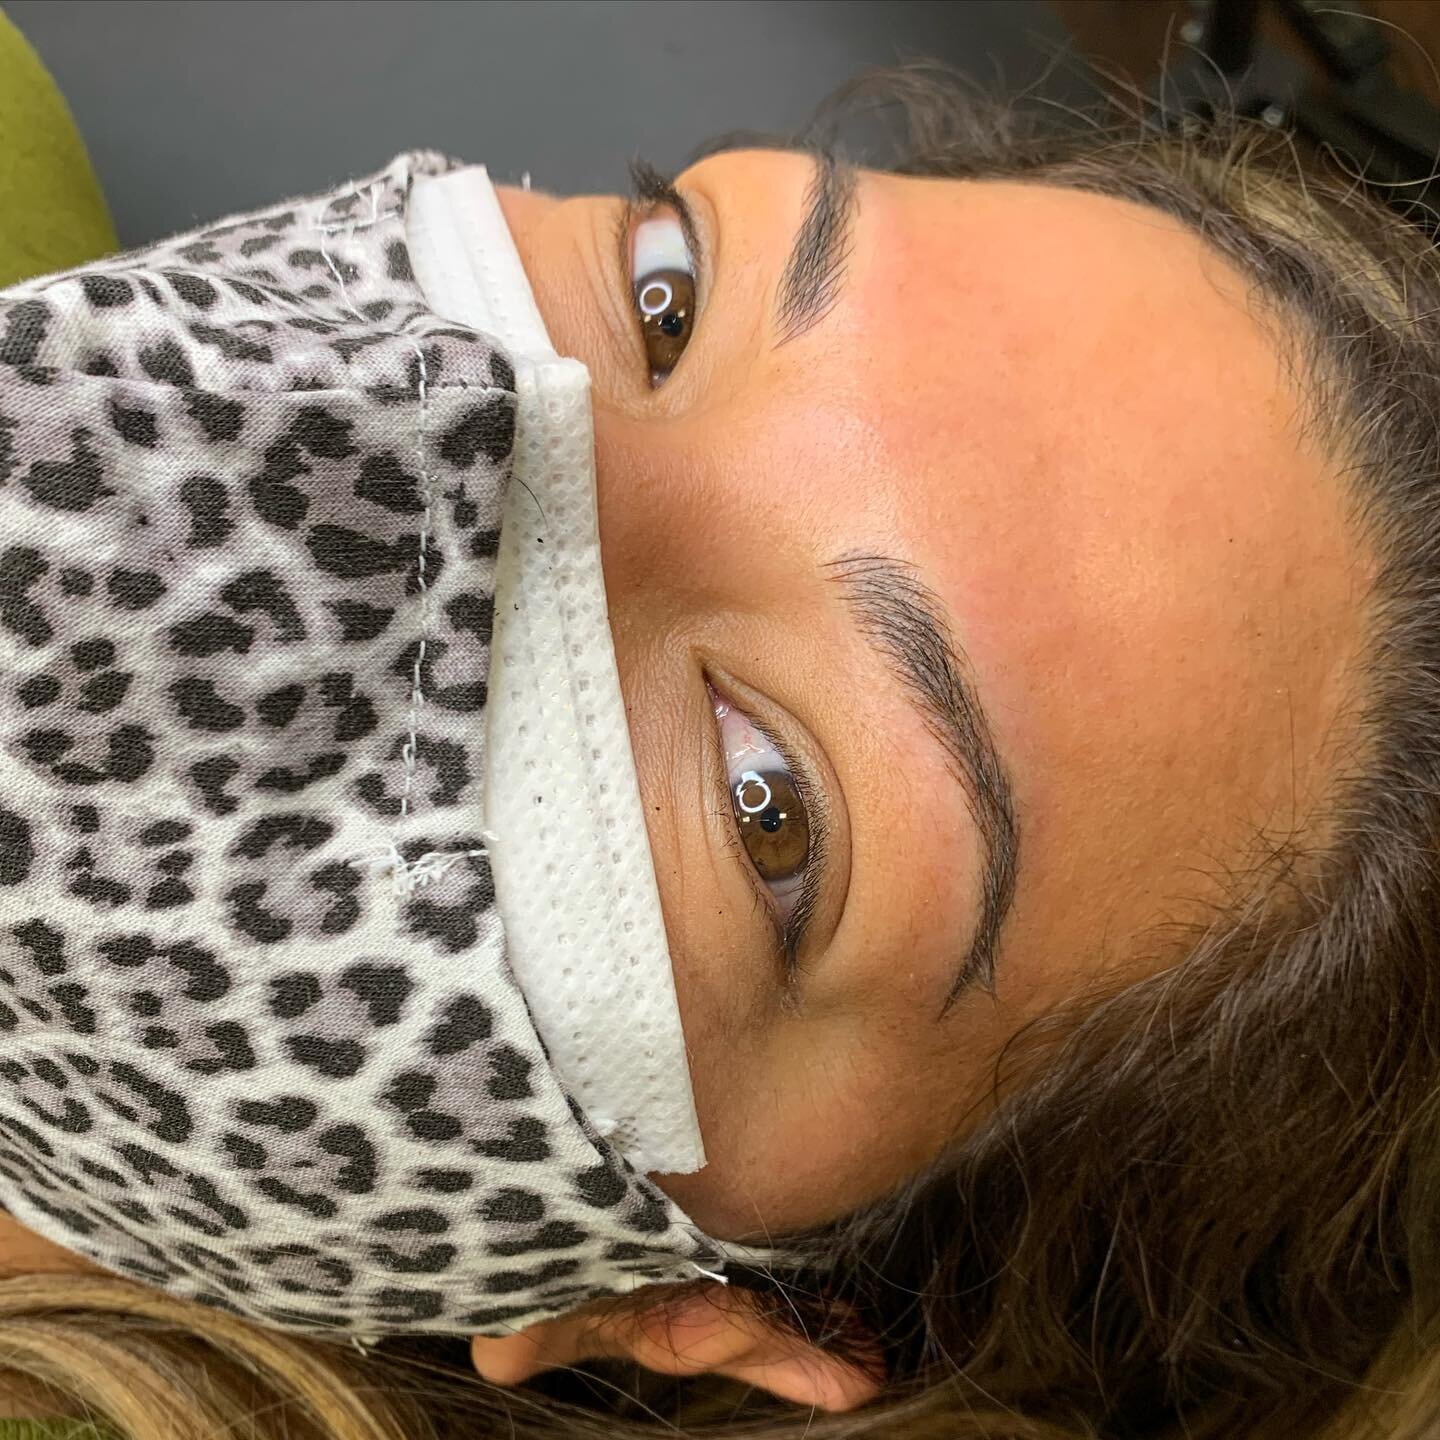 Here&rsquo;s yet another re-work!  She had her brows done elsewhere about 1.4 yrs ago and wanted to try something new. 
We did blade-and-shade to add density without having to do  multiple sessions. 
She was ready to go a tiny bit thicker and I&rsquo